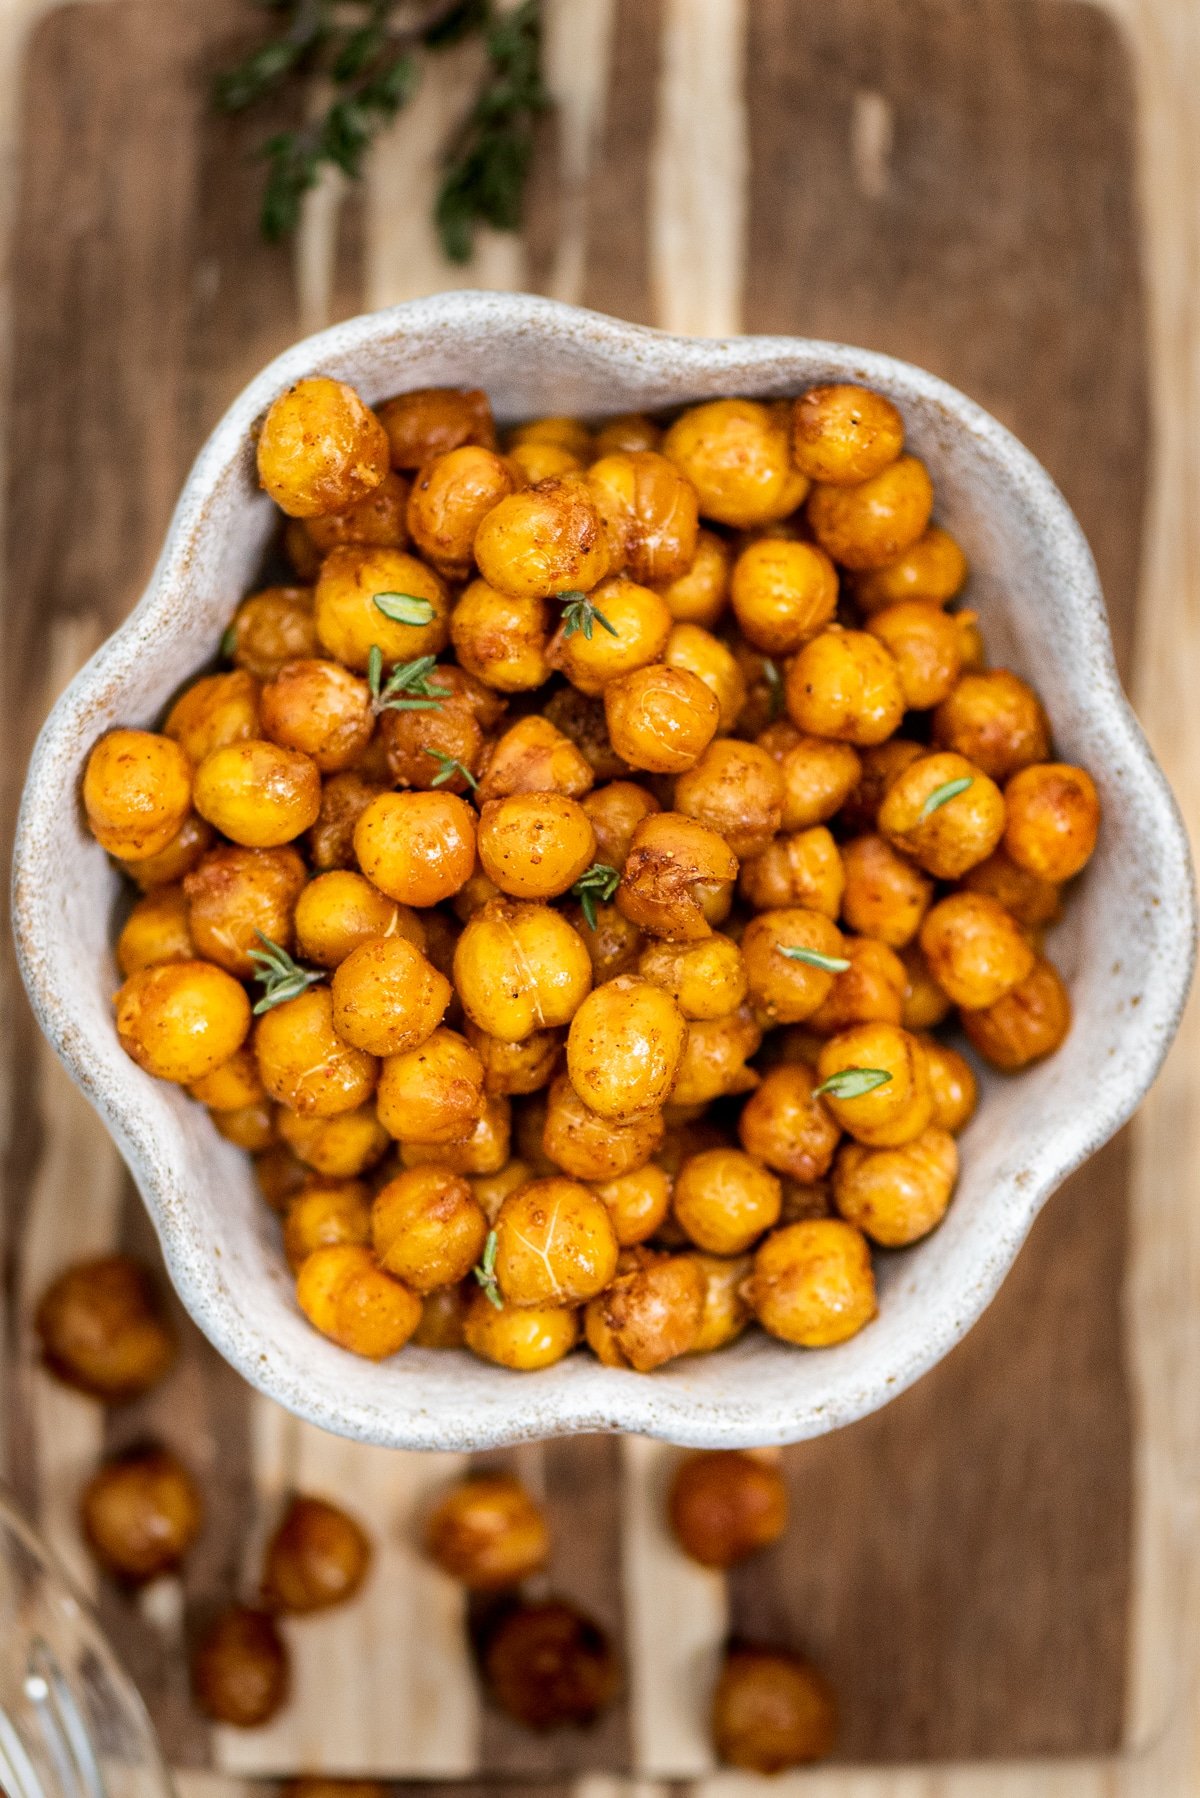 Spicy roasted chickpeas in a white bowl.